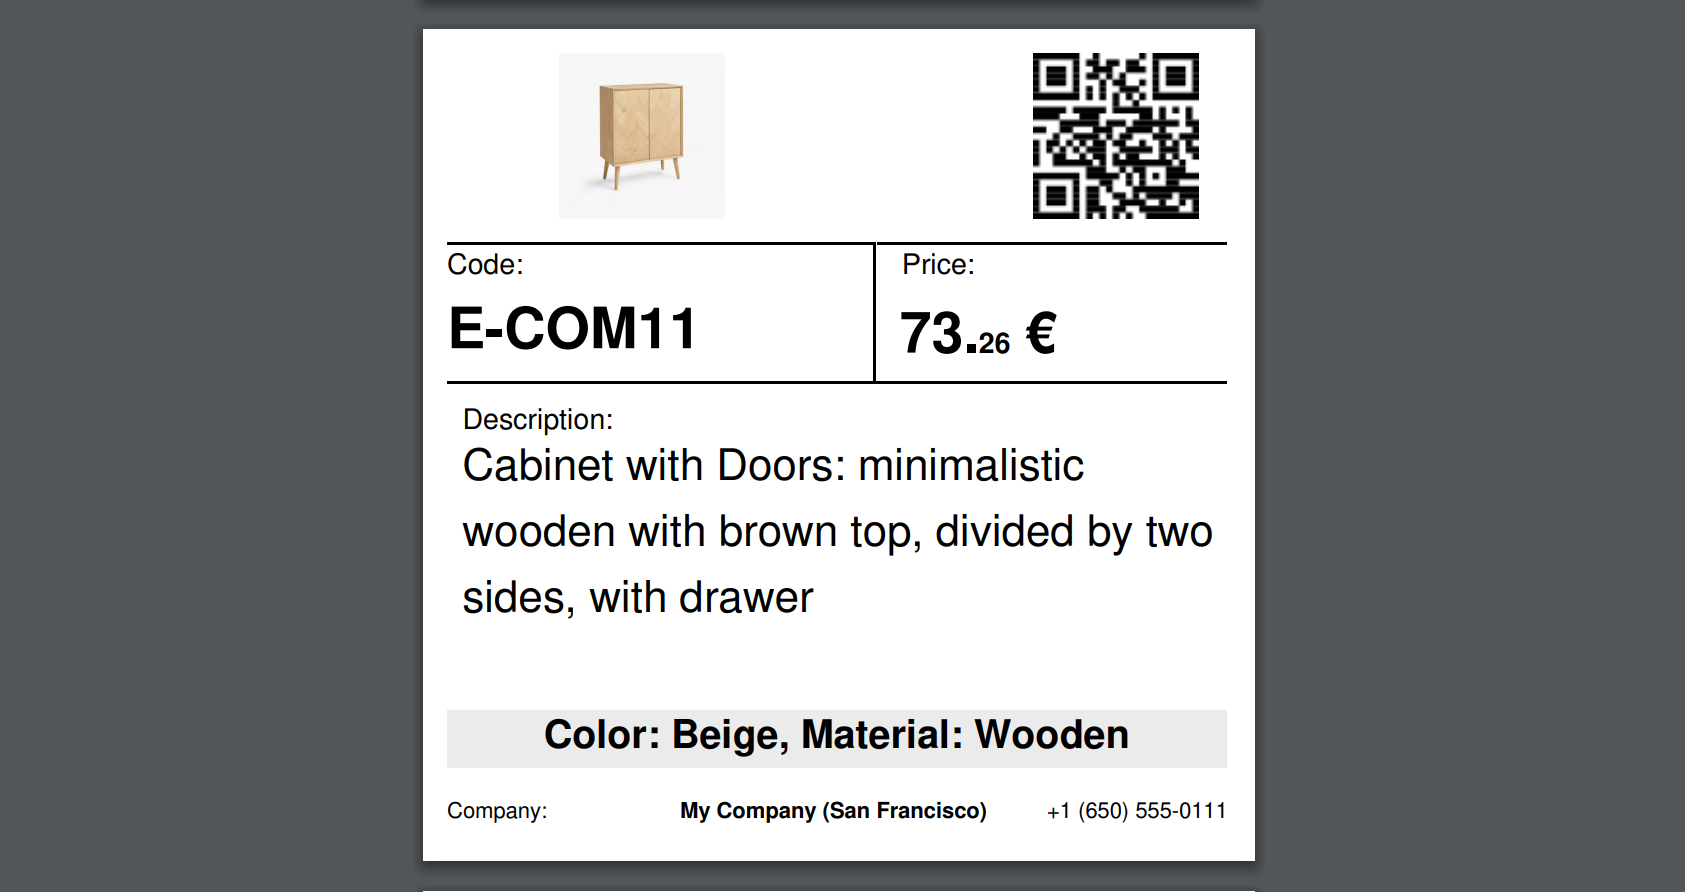 Odoo 17.0 dymo barcode product label 100 x 100 mm